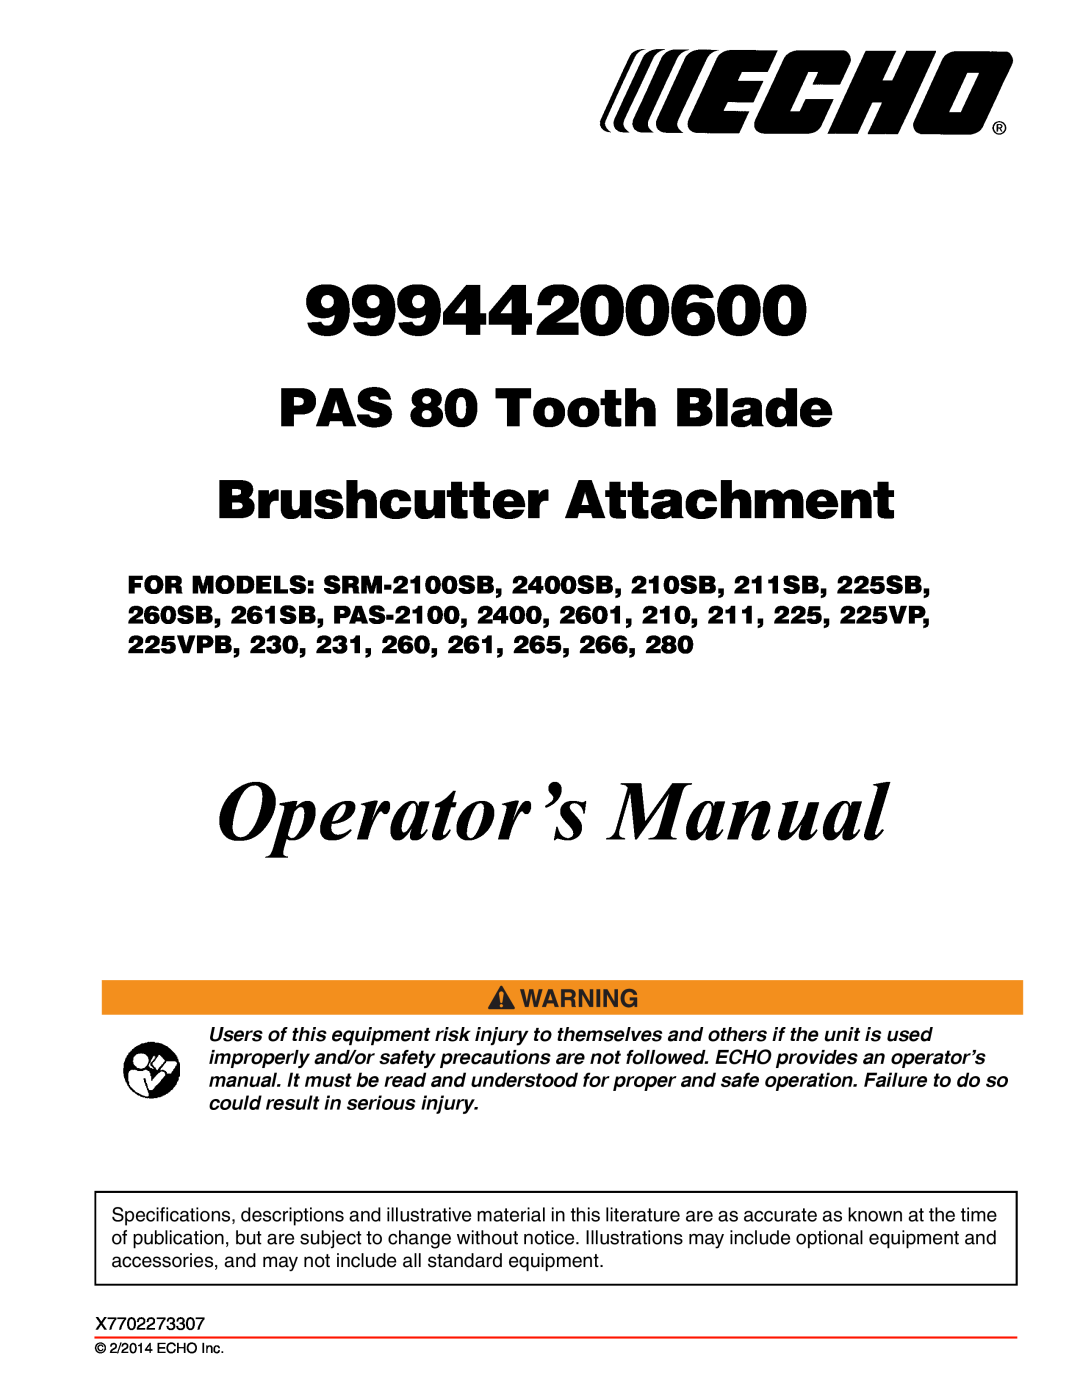 Echo 261, 260, 231, 2400 specifications Operator’s Manual, 99944200615, PAS Rapid LoaderTM Curved Shaft Trimmer Attachment 